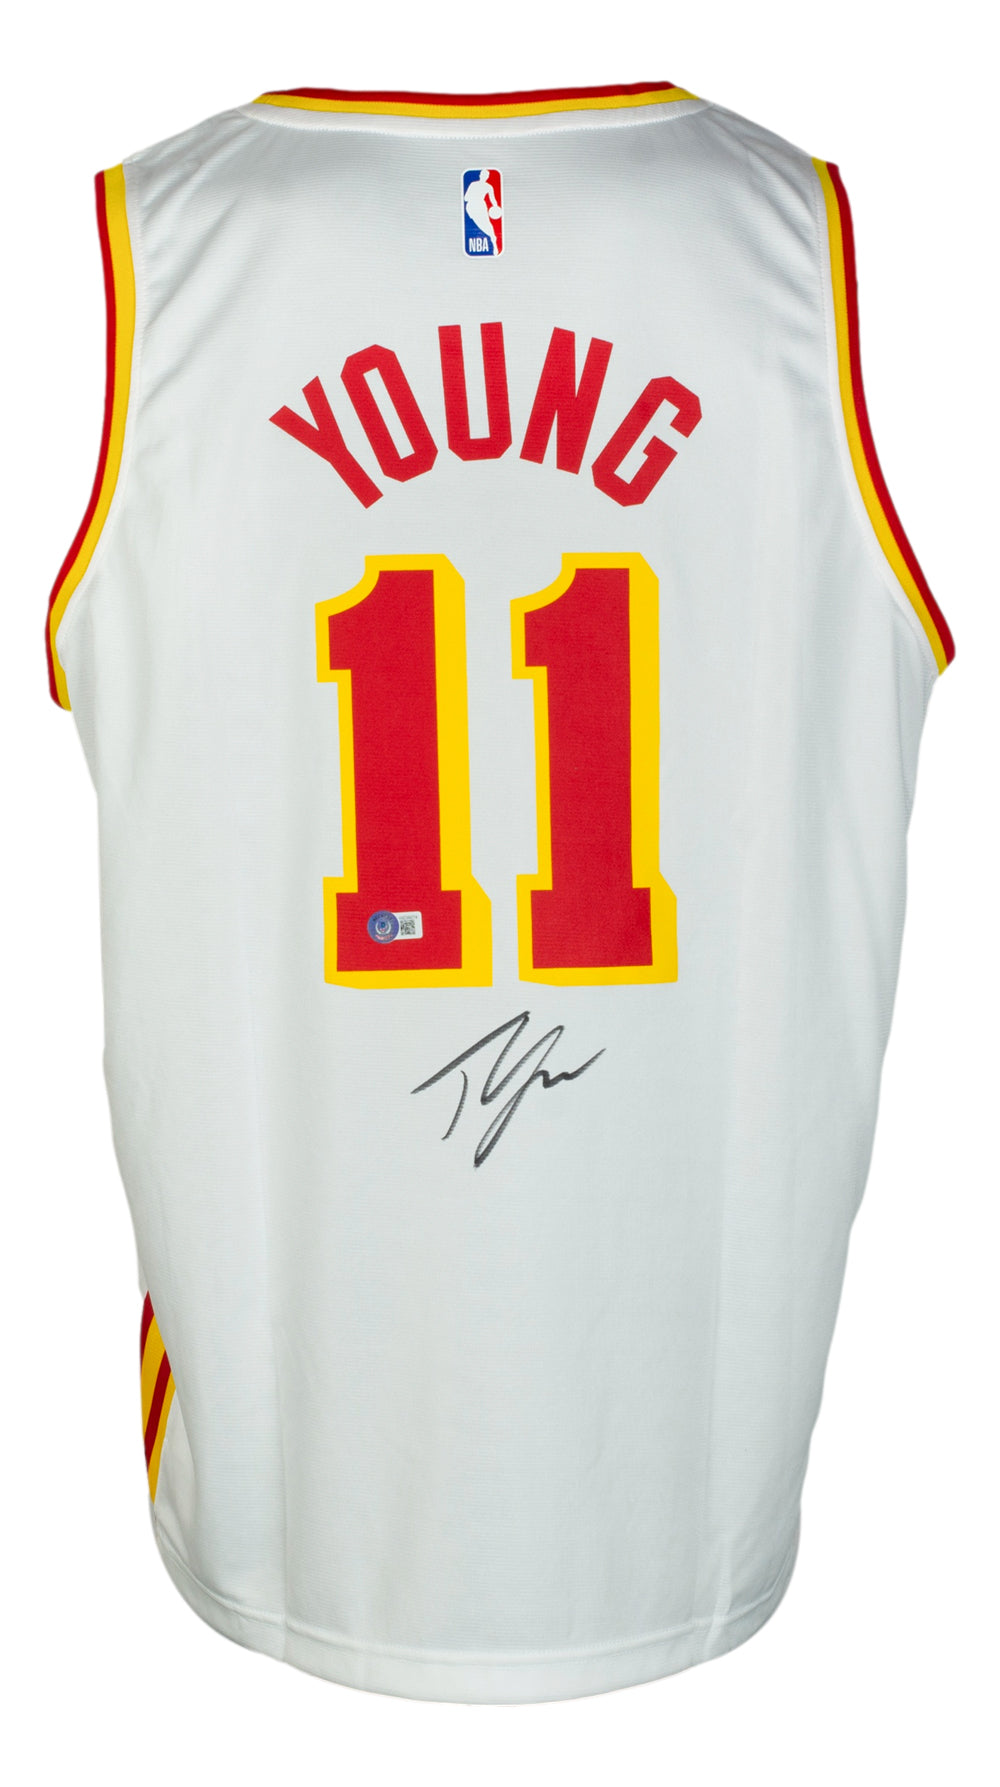 Trae Young Jersey -  Sweden